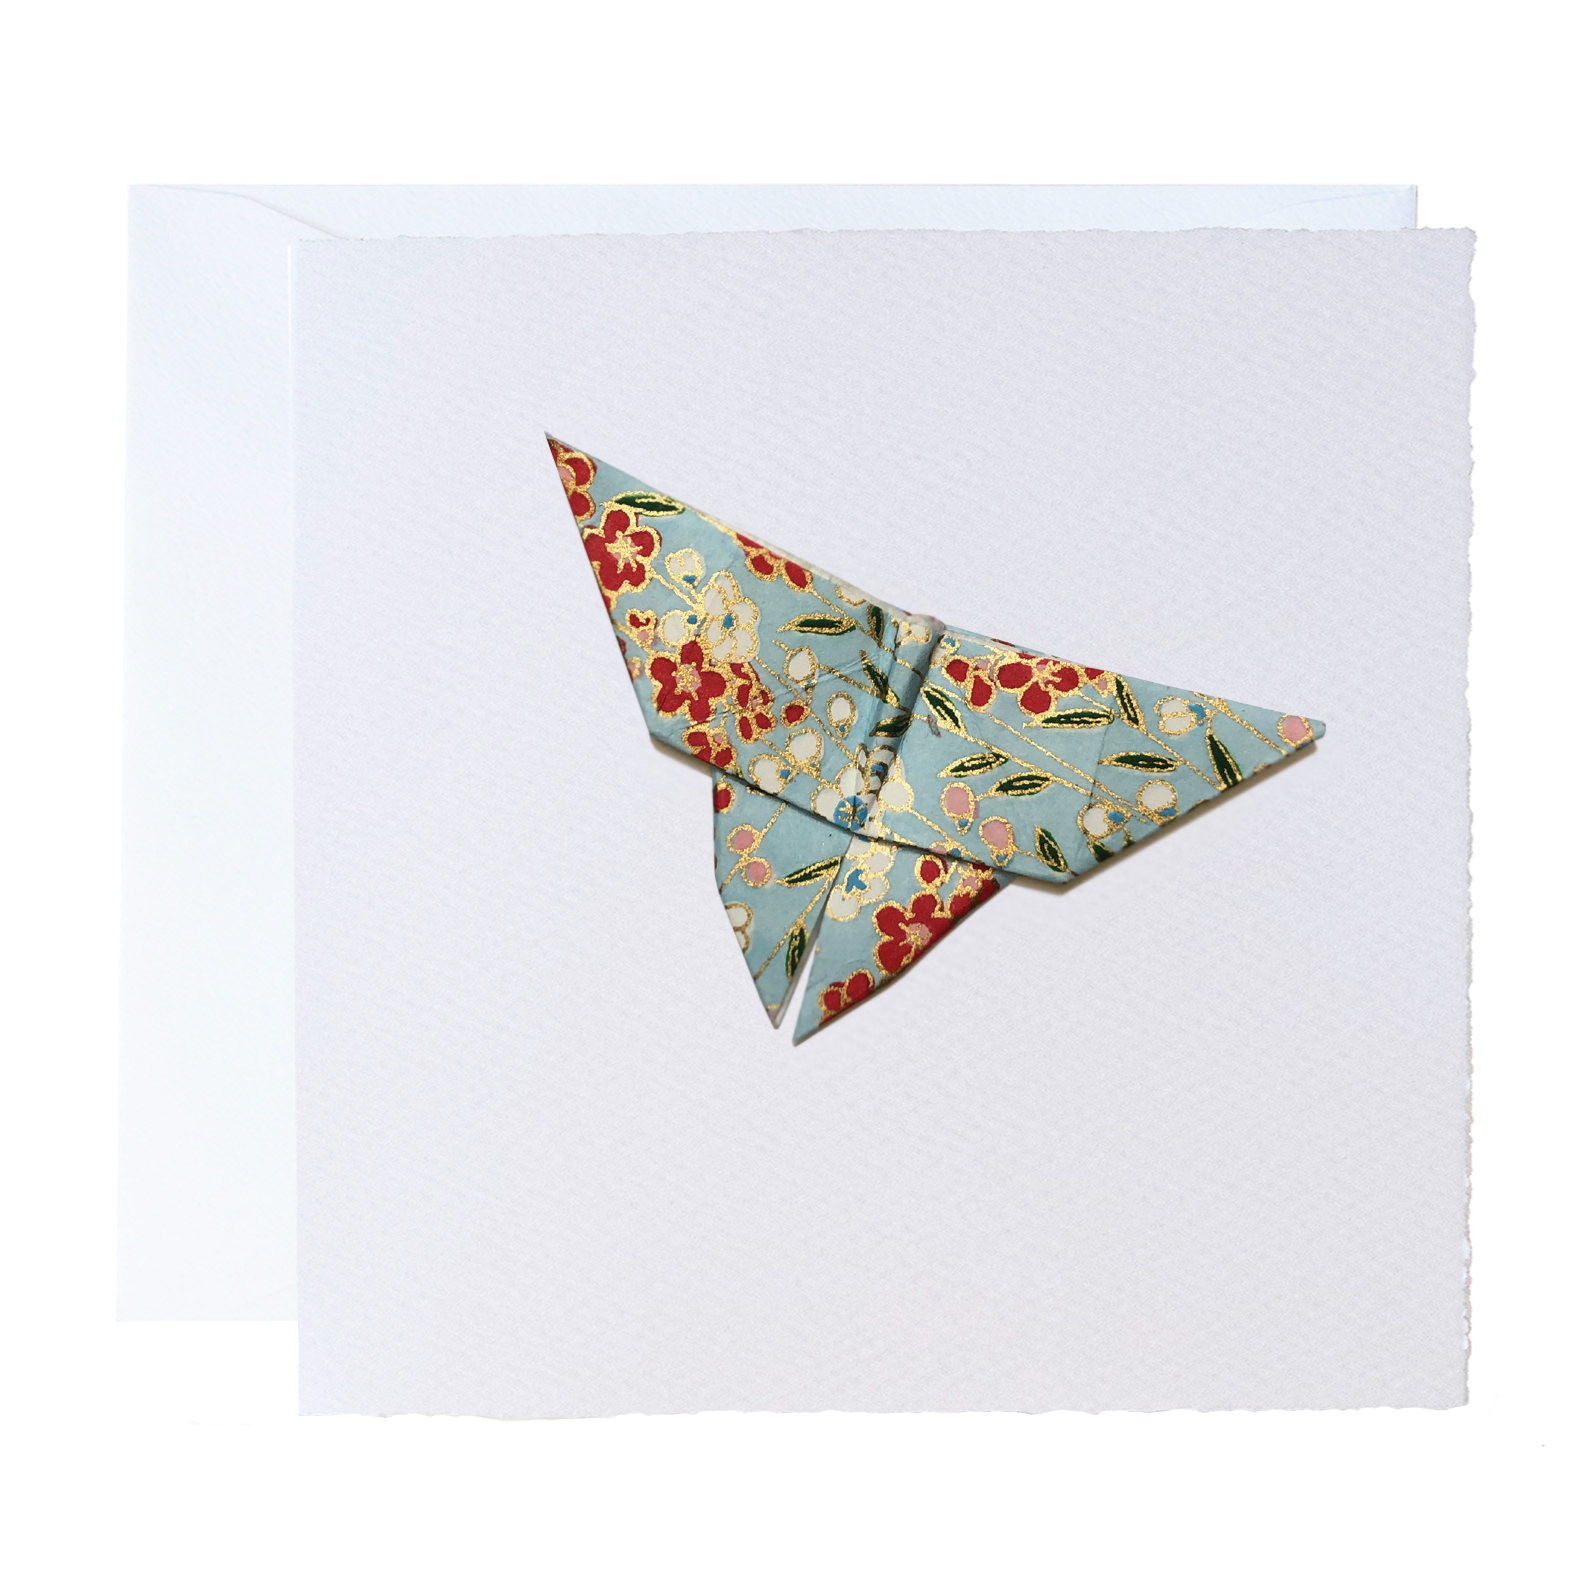 All Occasion Greeting Card | Handmade Origami | Butterfly | Flowers | Red White and Pale Blue | Kami Paper